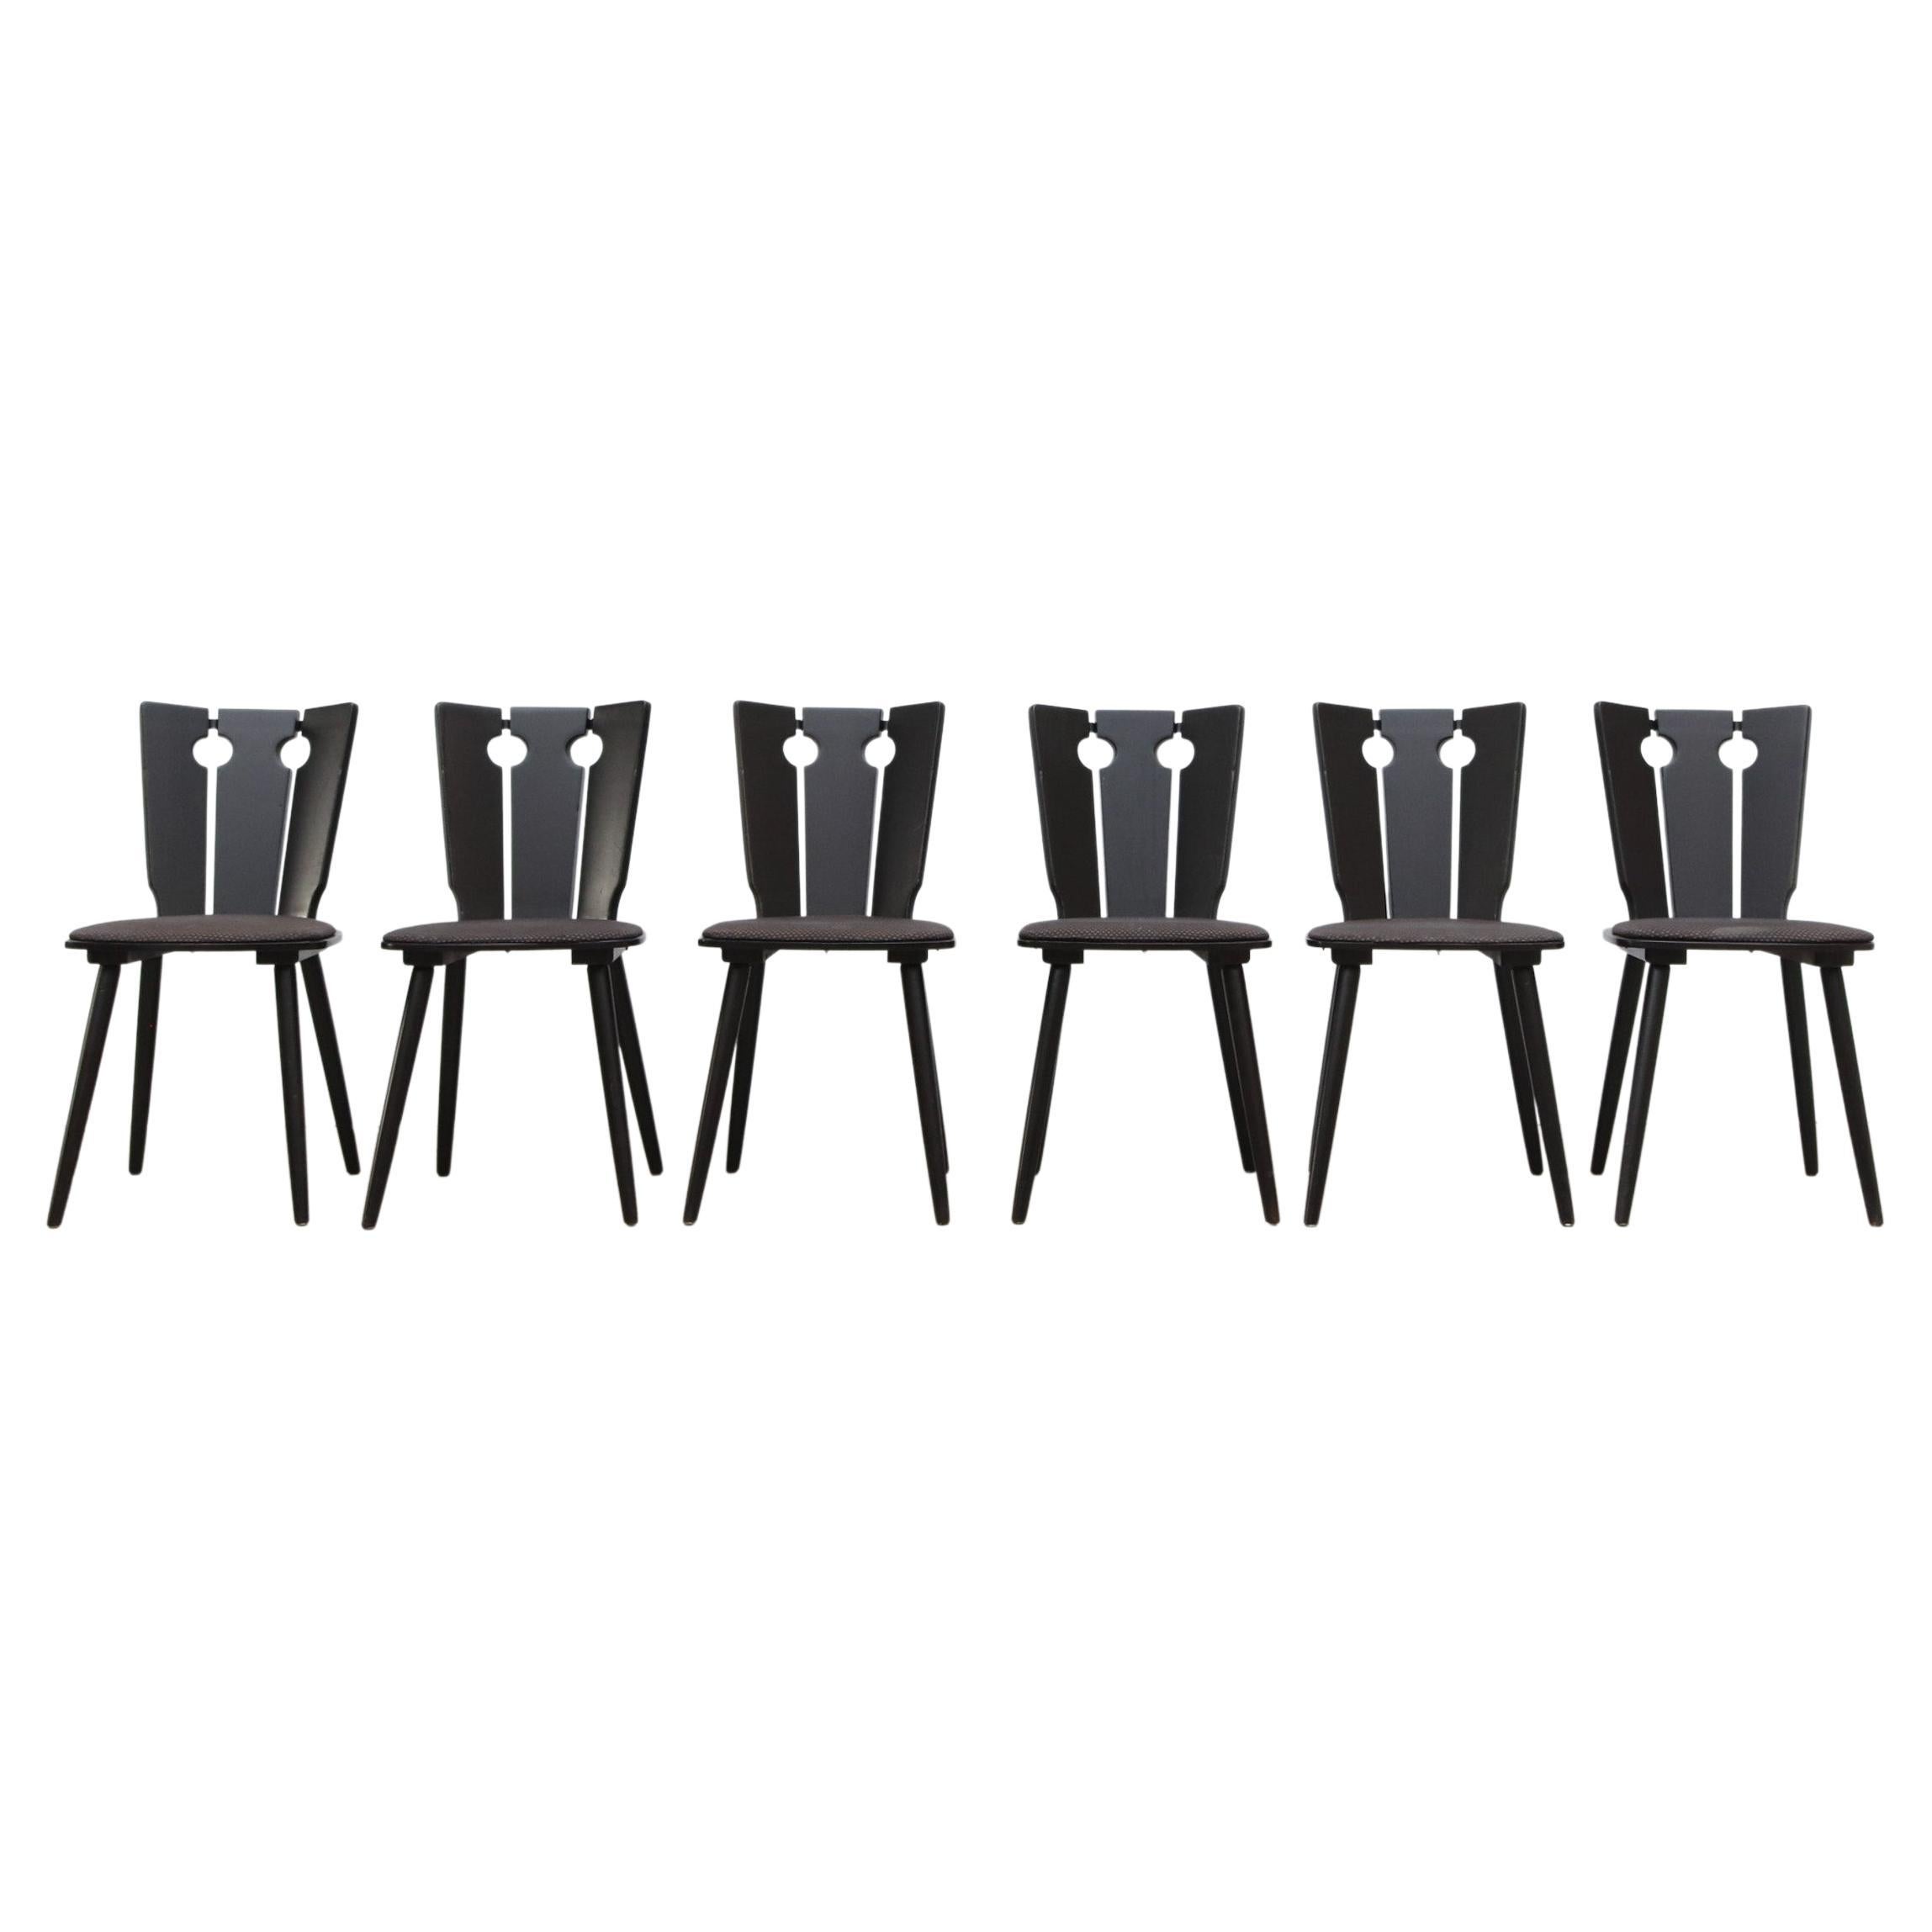 Gilbert Marklund Style Ebony Brutalist Chairs with Original Upholstered Seats